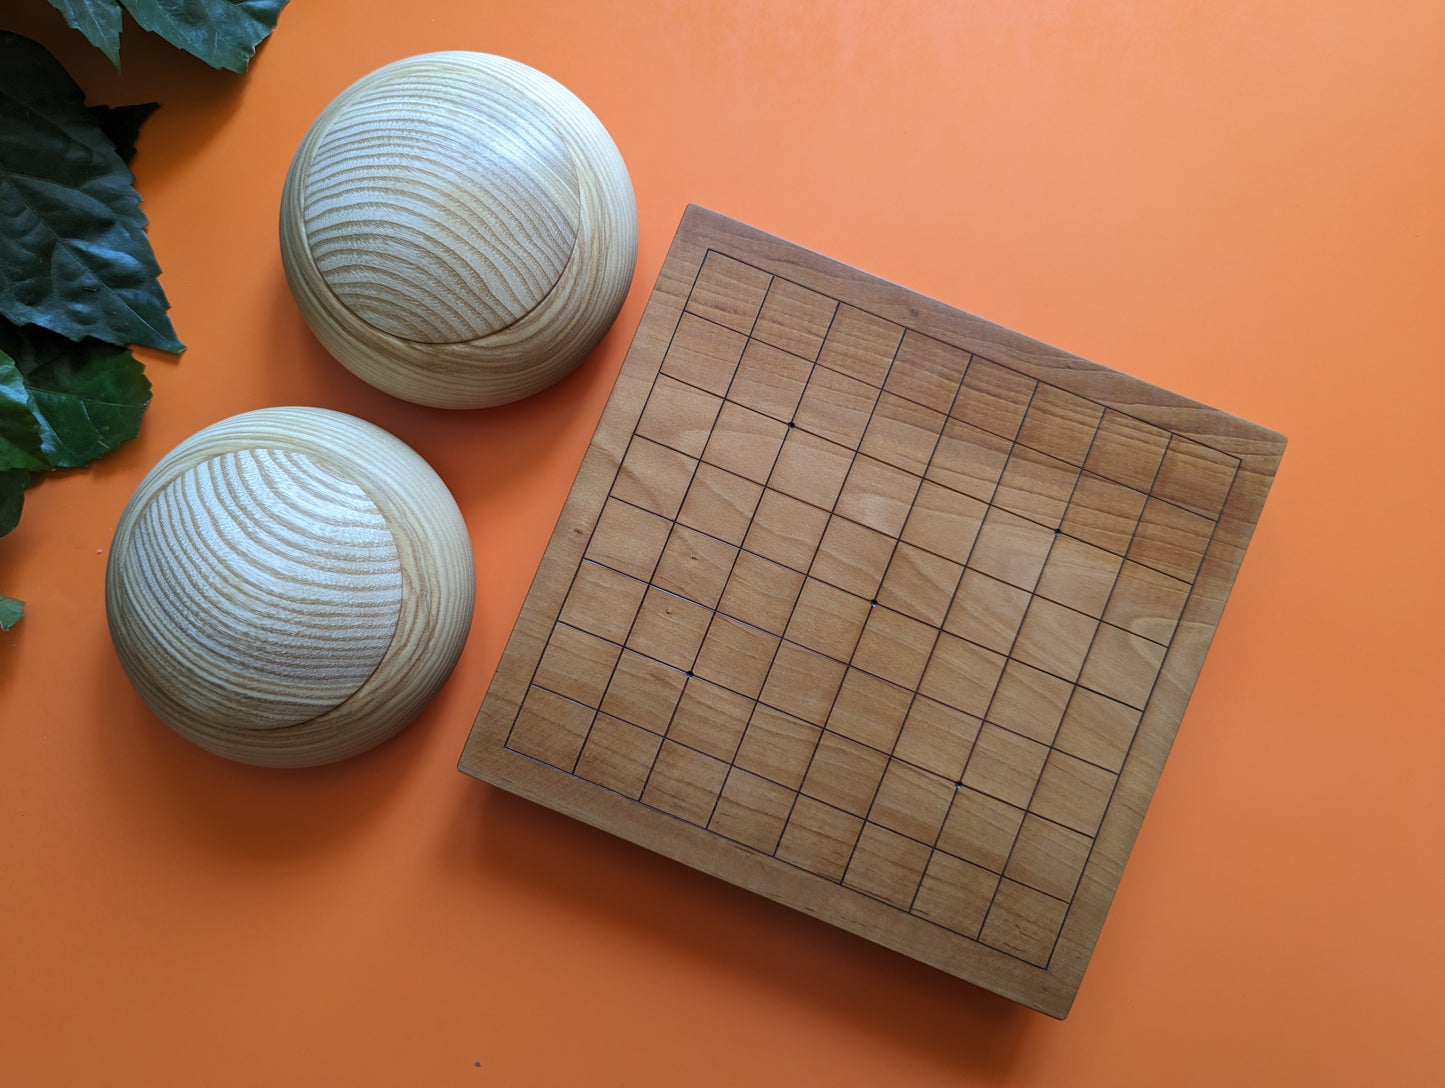 Game Go solid pear wood 9x9 Goban. Hand carved board with YunZi stones